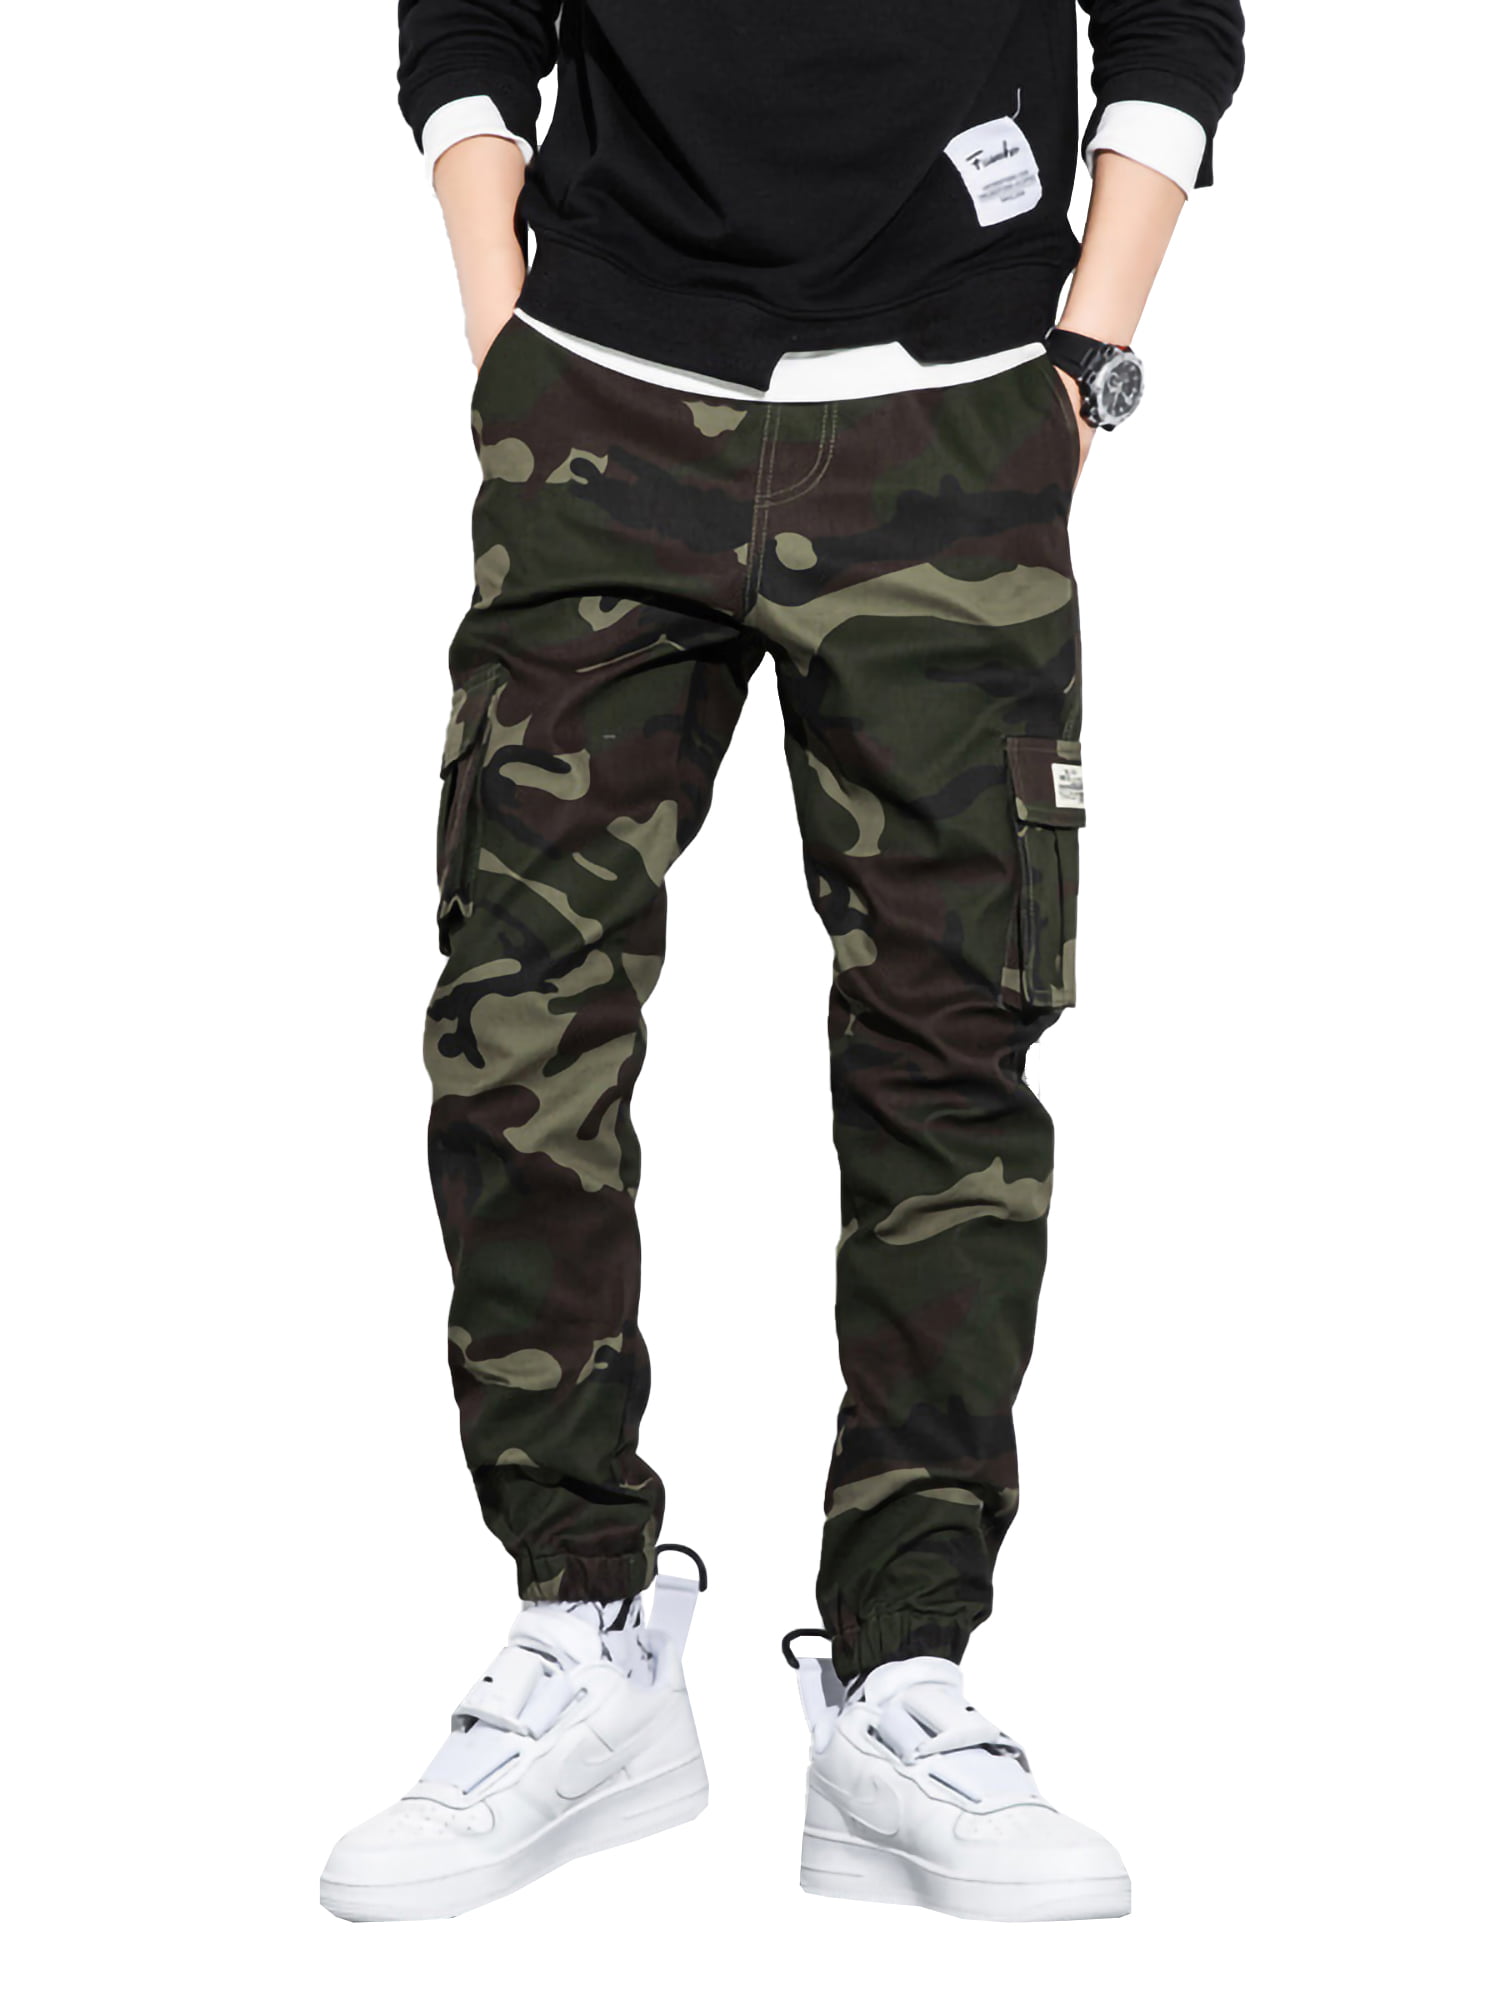 Men's Camouflage Cargo Pants Casual Jogger Elastic Waist Ankle Banded ...